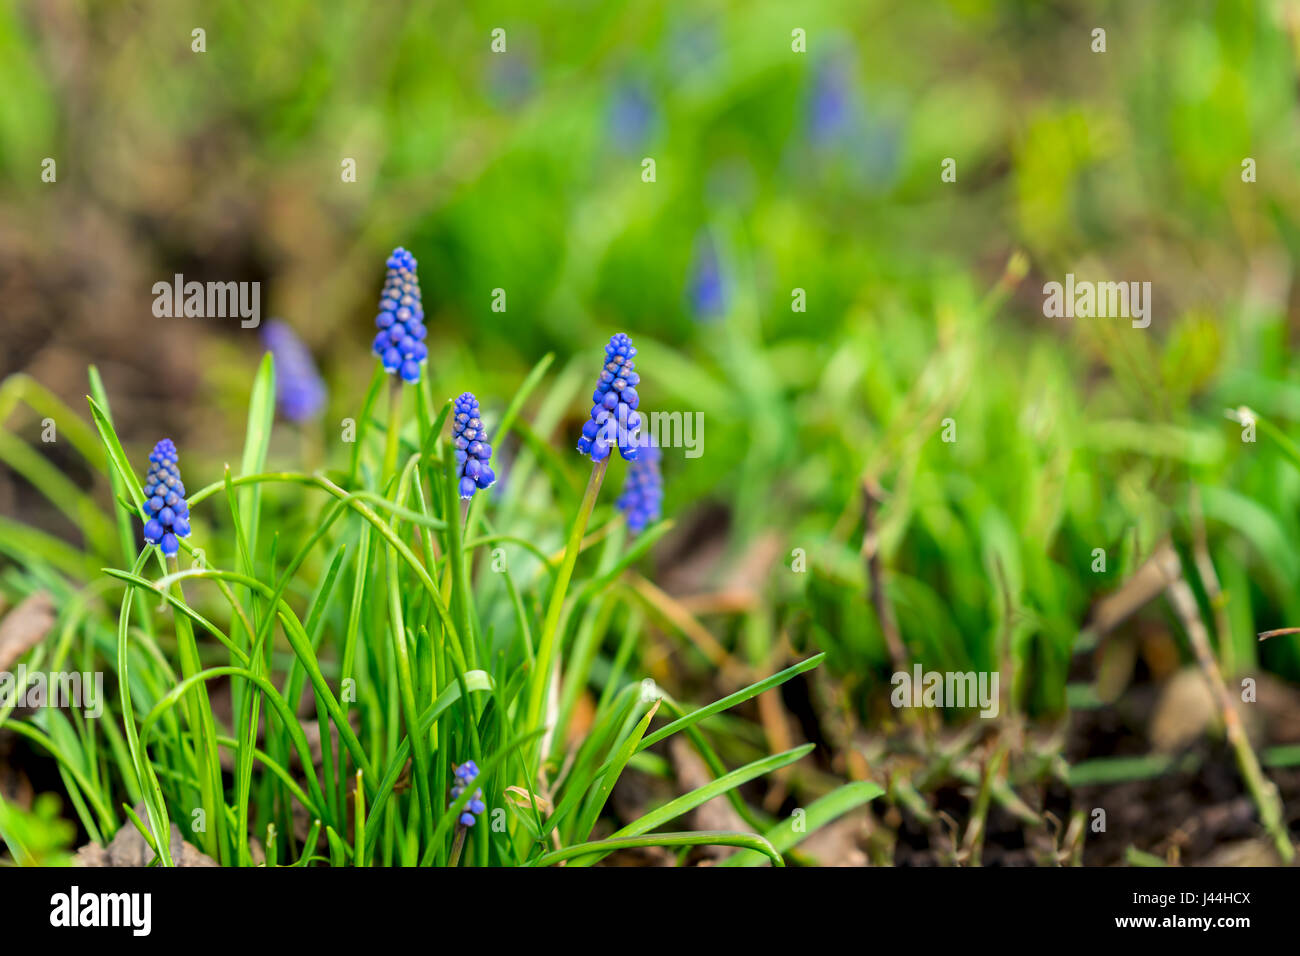 Natural flower background. Beautiful muscari hyacinth blooming on a green lawn in the garden or in park, copy space, selective focus. Concept of spring, seasons. Stock Photo